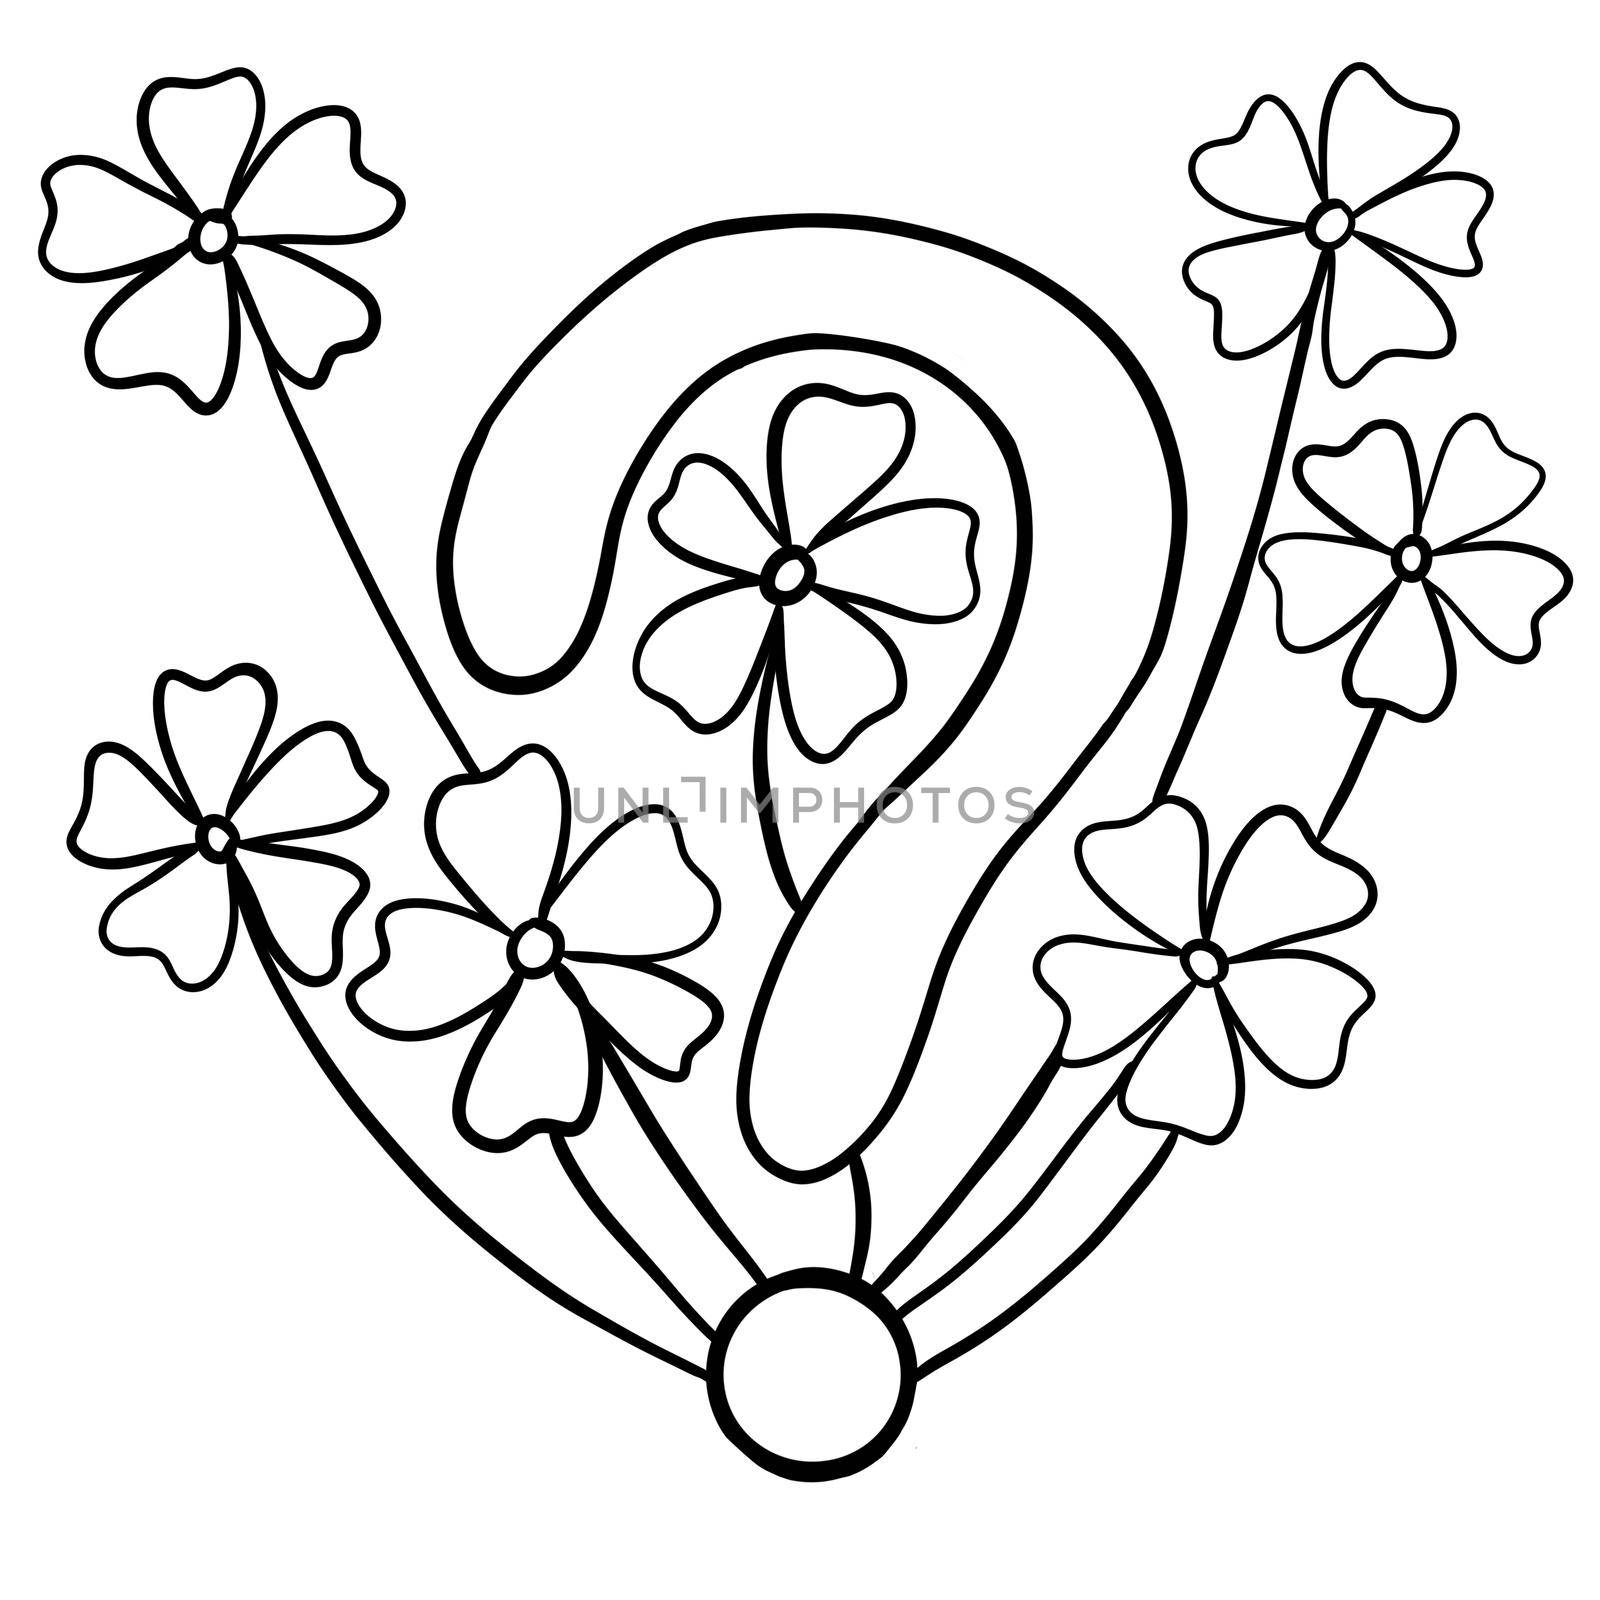 Hand drawn illustration of question mark with leaves flowers nature elements. Why concept for ecology environment environmental causes. Simple minimalist design with black line outline silhouette, spring summer print